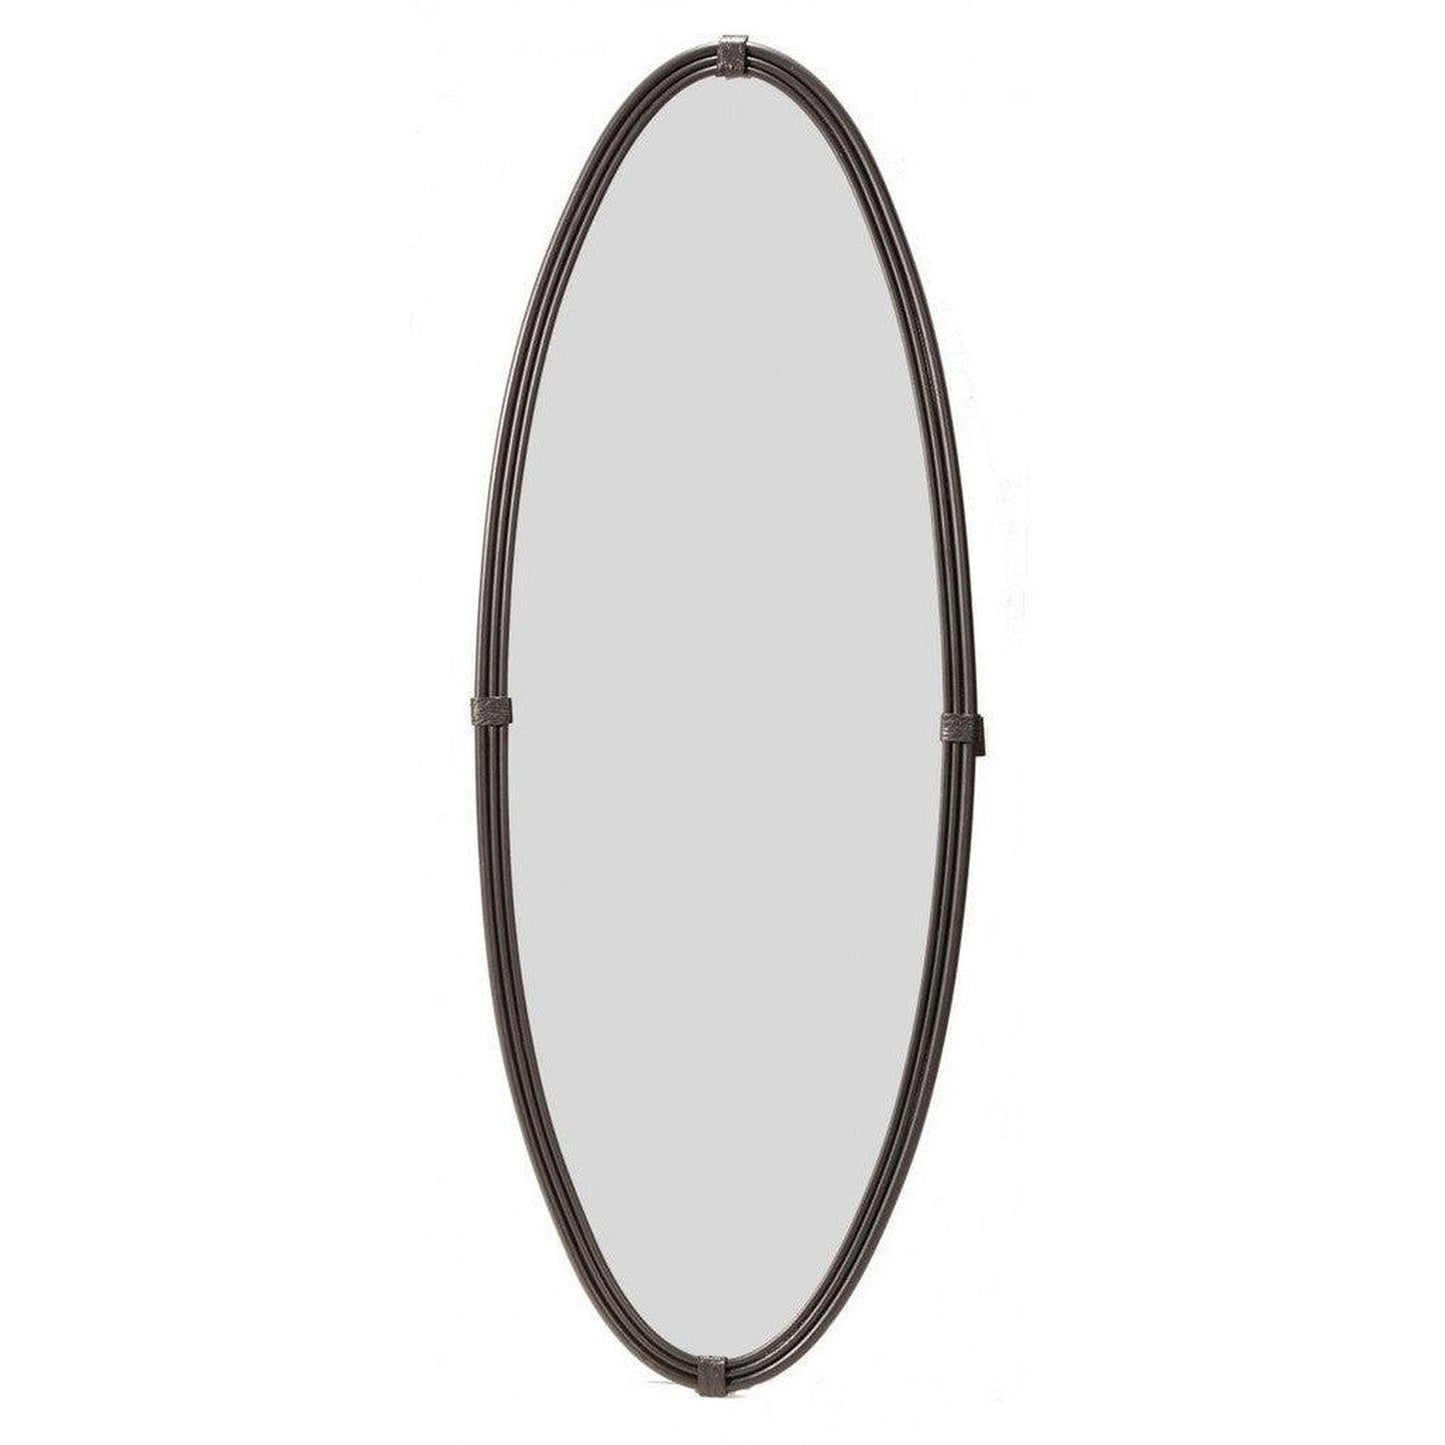 Stone County Ironworks Queensbury 19" Large Satin Black Oval Iron Wall Mirror